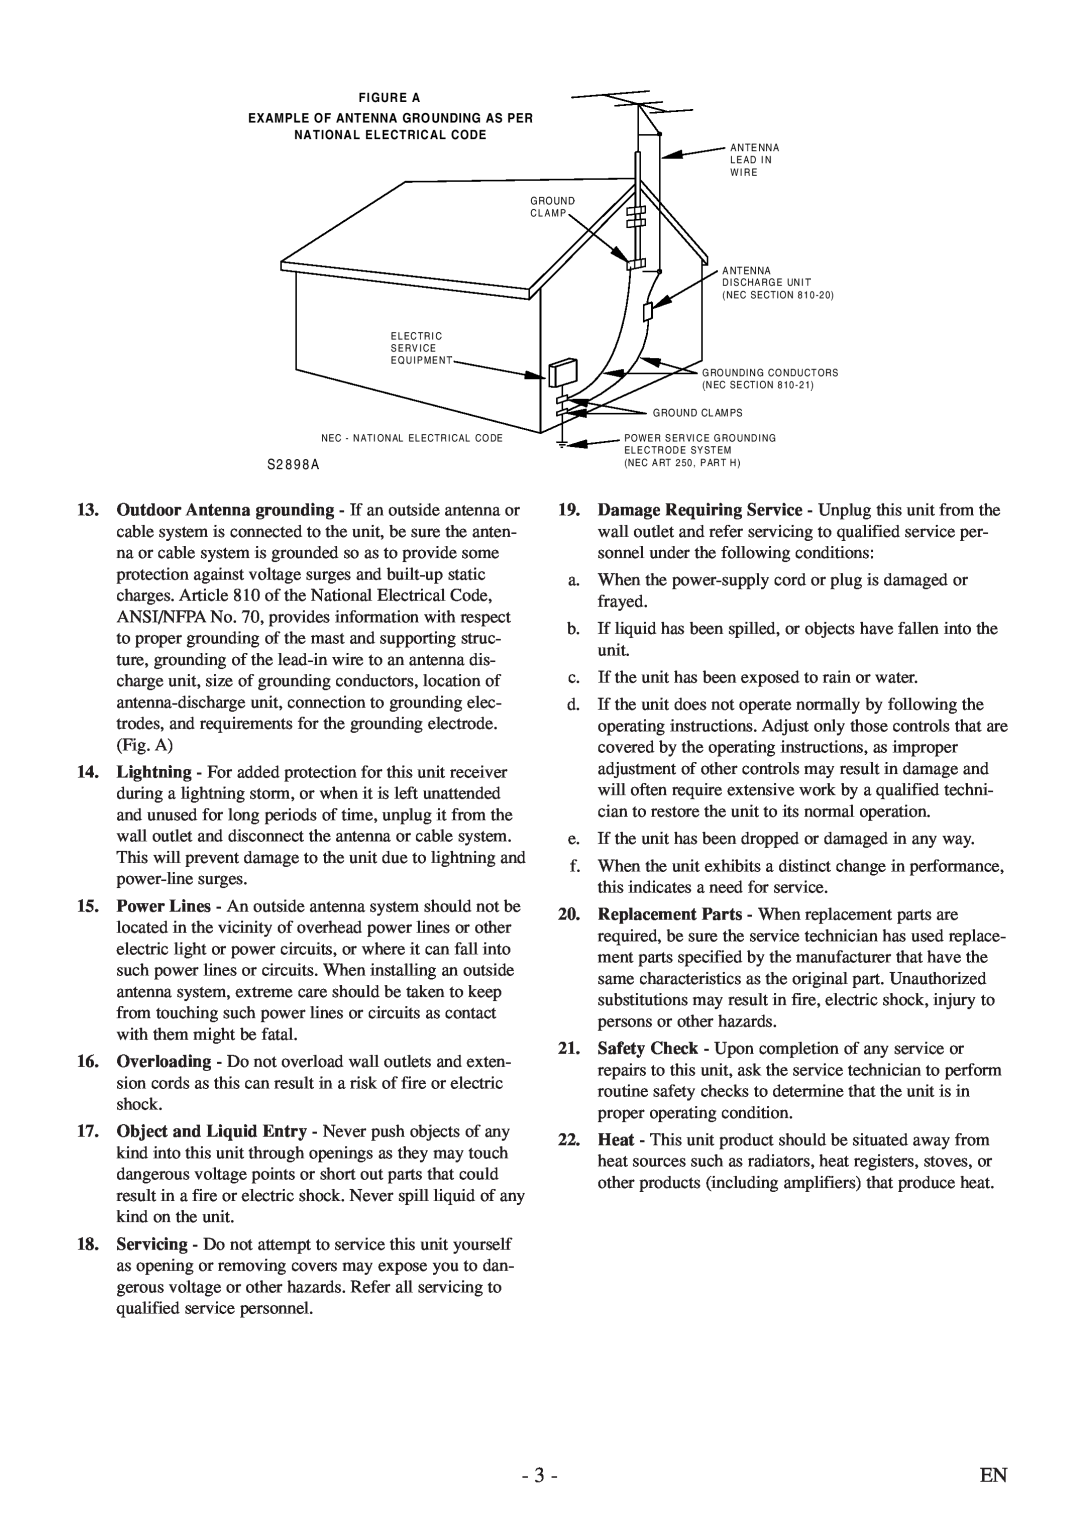 FUNAI MSD520FF owner manual a. When the power-supply cord or plug is damaged or frayed 